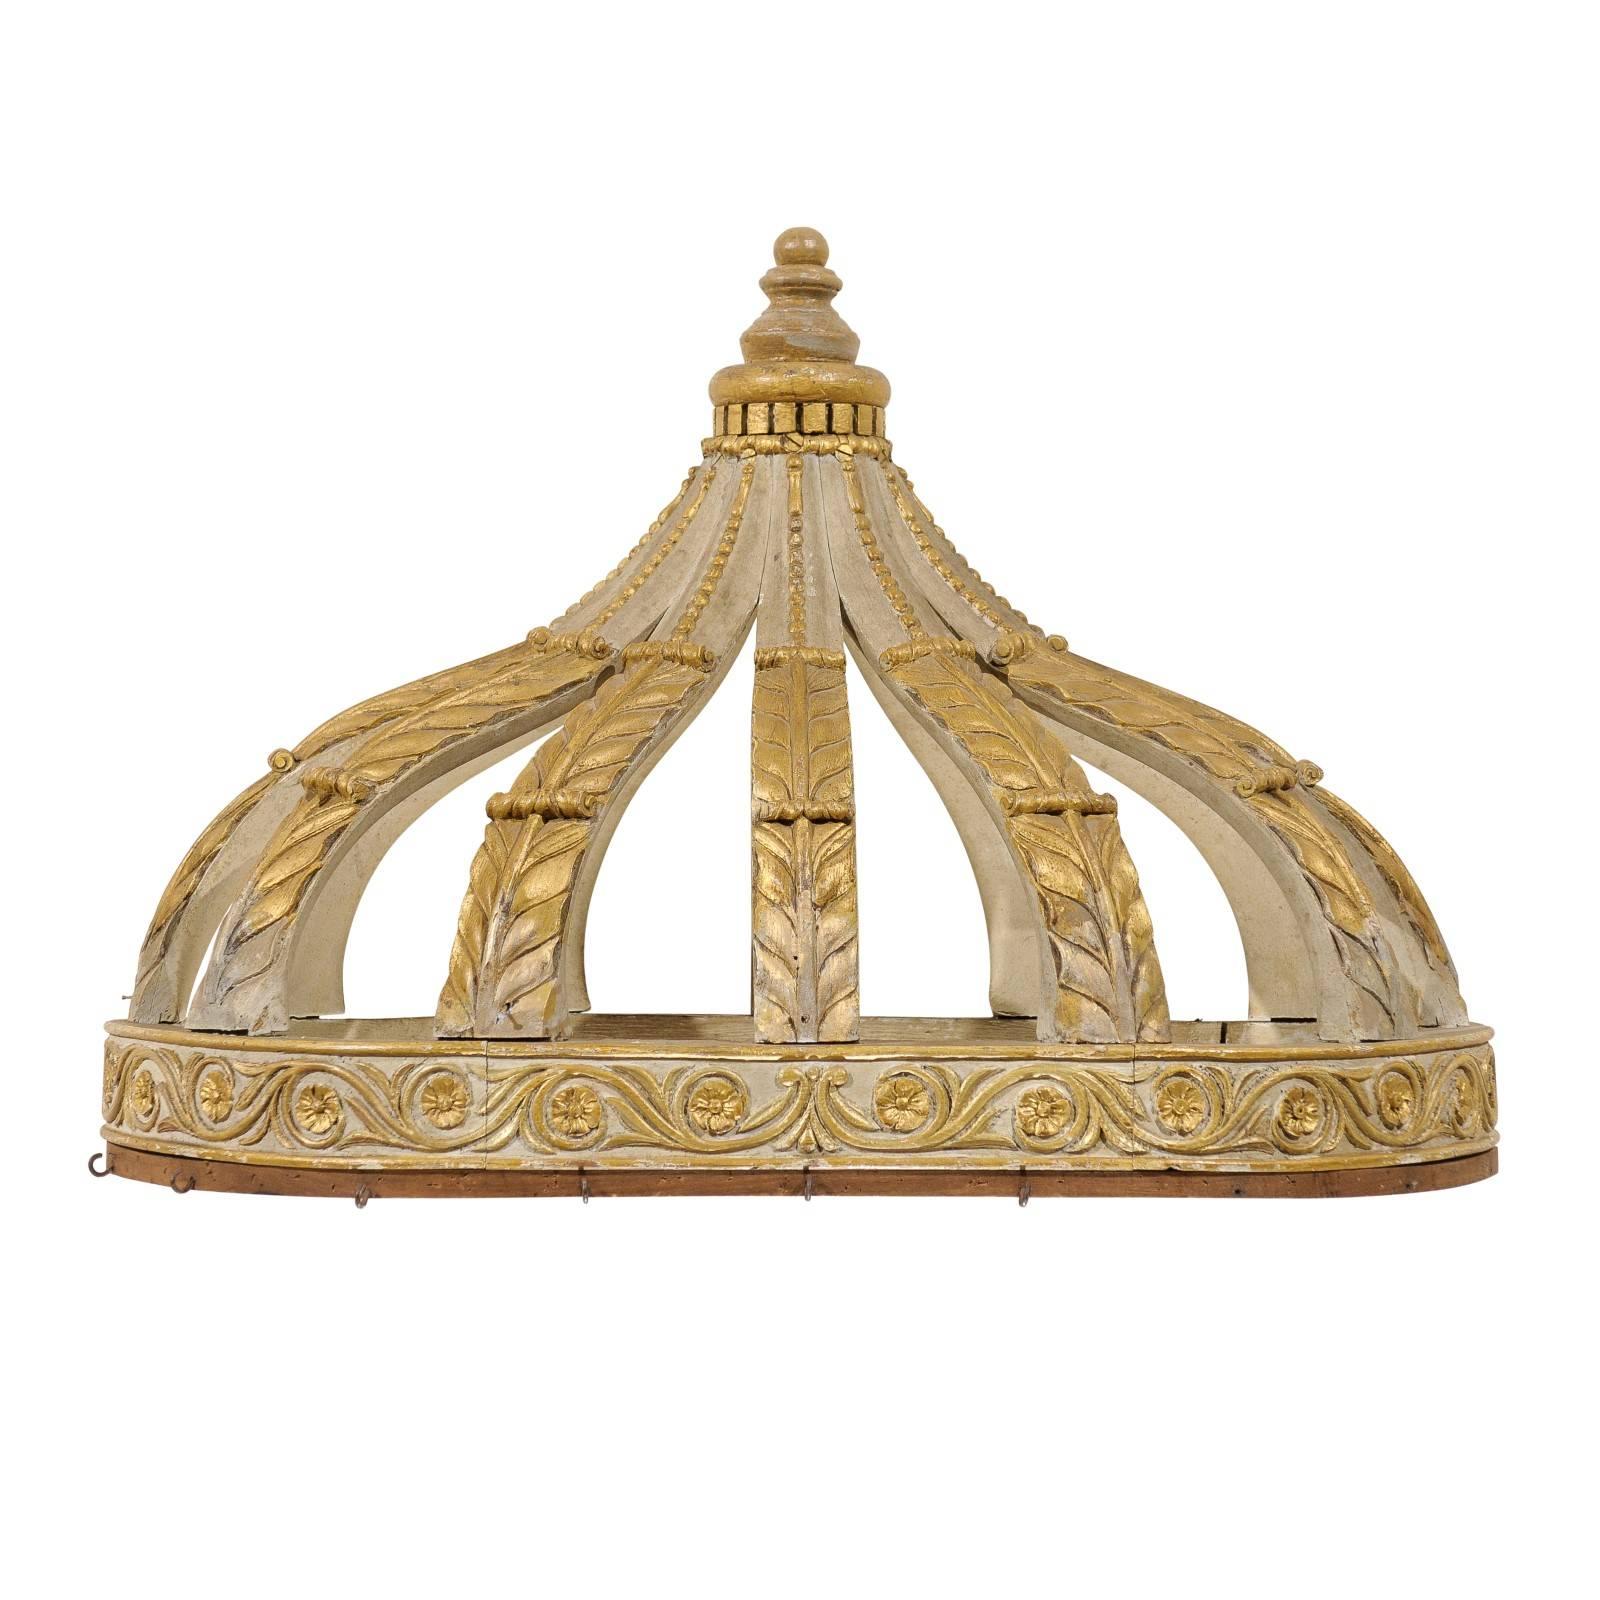 Italian Bed Corona or Bed Crown with Gilt Accents and Carved Rinceaux Frieze